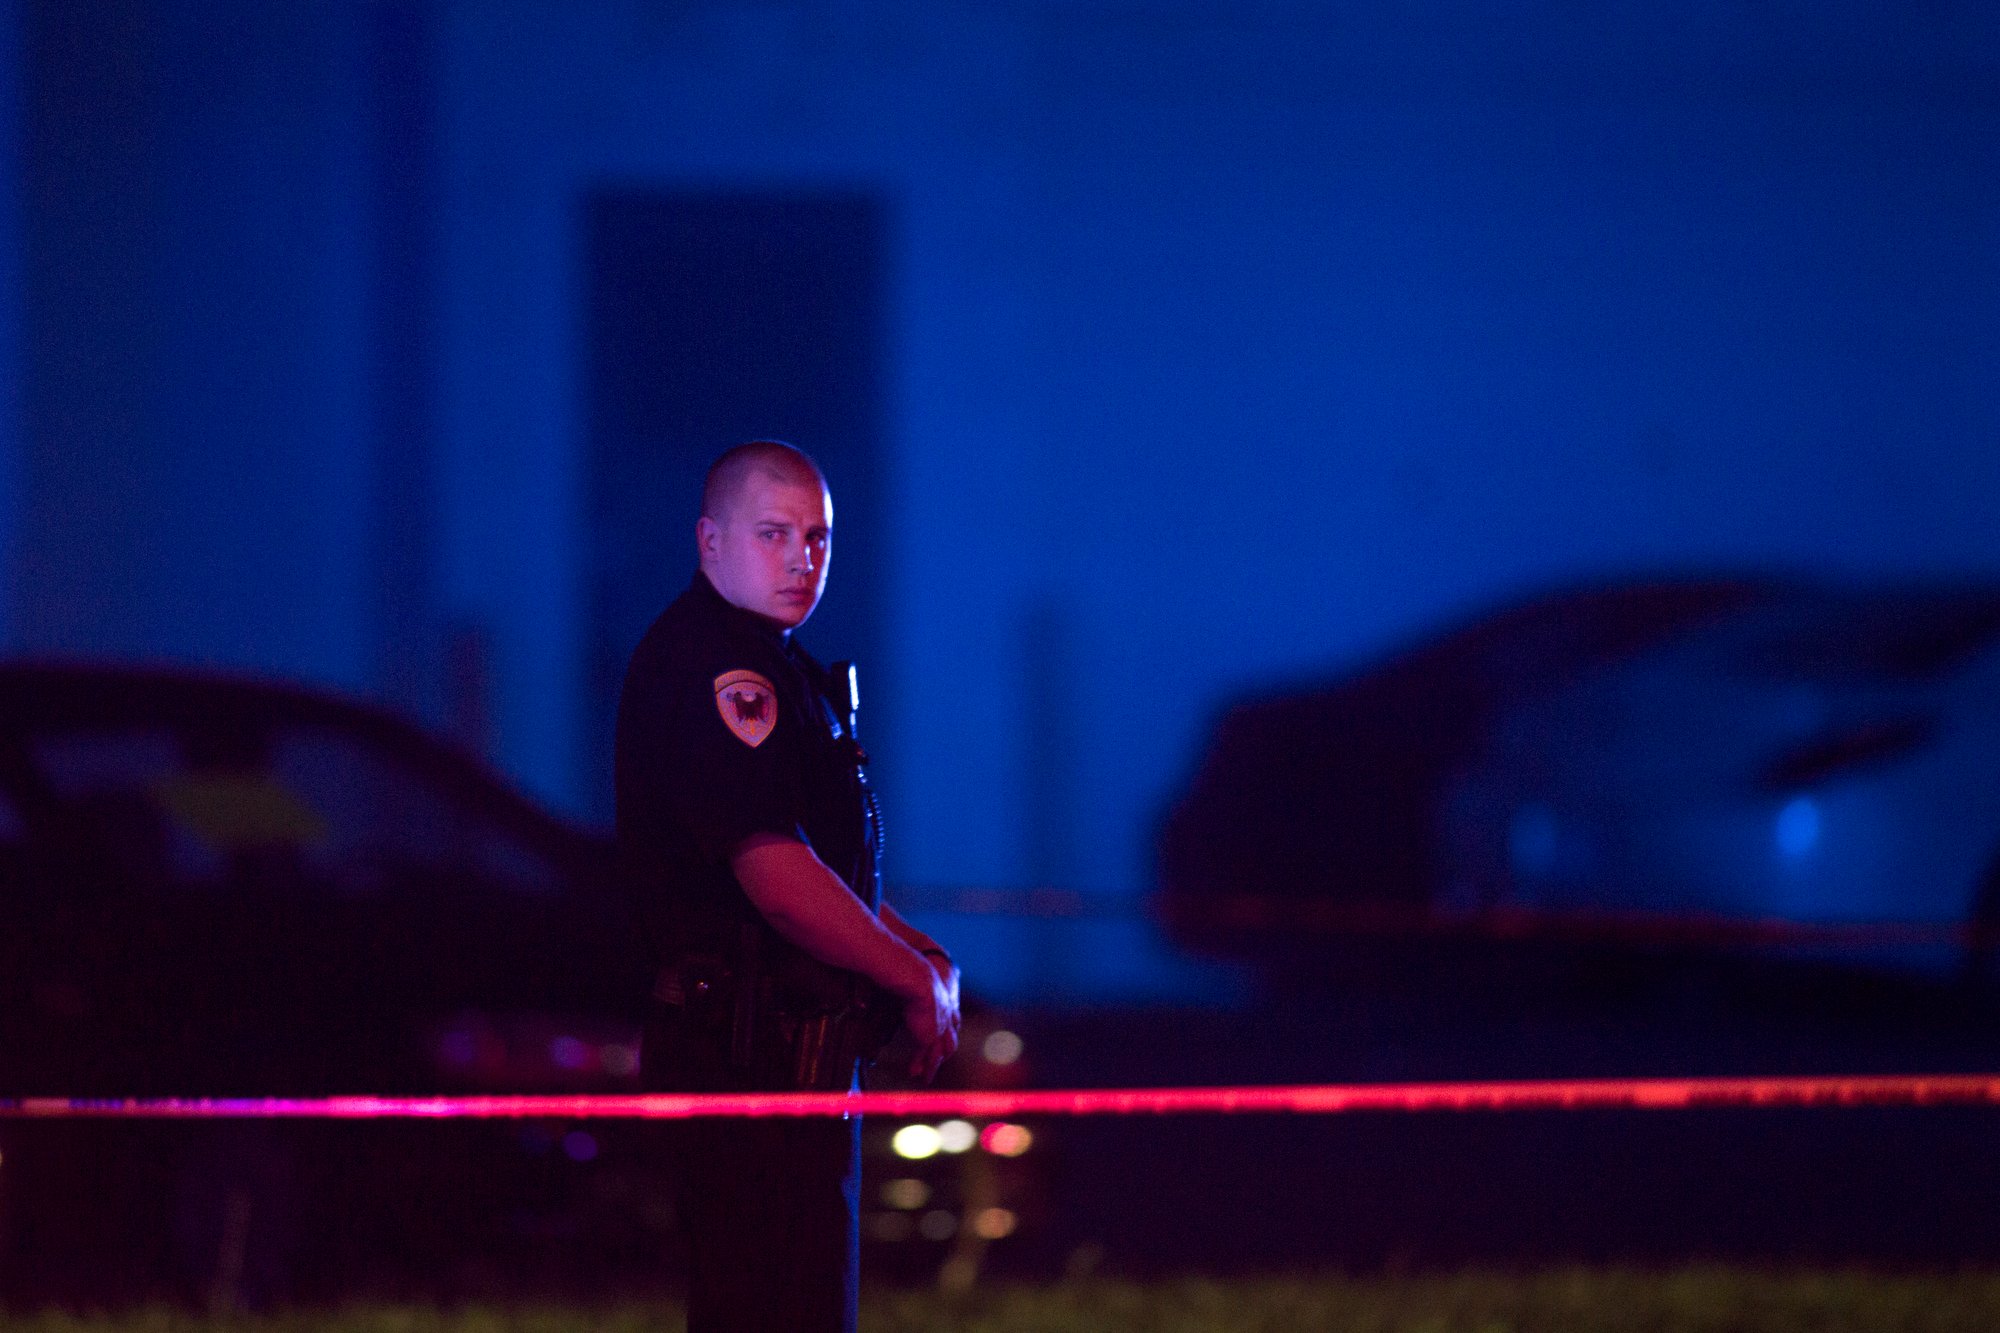 In this Sept. 7, 2016 photo, a police officer guards the scene after a police officer fatally shot a man who was suspected of stealing a semi-automatic pistol from a gun store in Wyoming, Mich., in the suburbs of Grand Rapids. Community leaders in Grand Rapids say the police can only do so much. They're looking for more proactive measures as opposed to reactive ones. (Tom Brenner—Grand Rapids Press/AP)